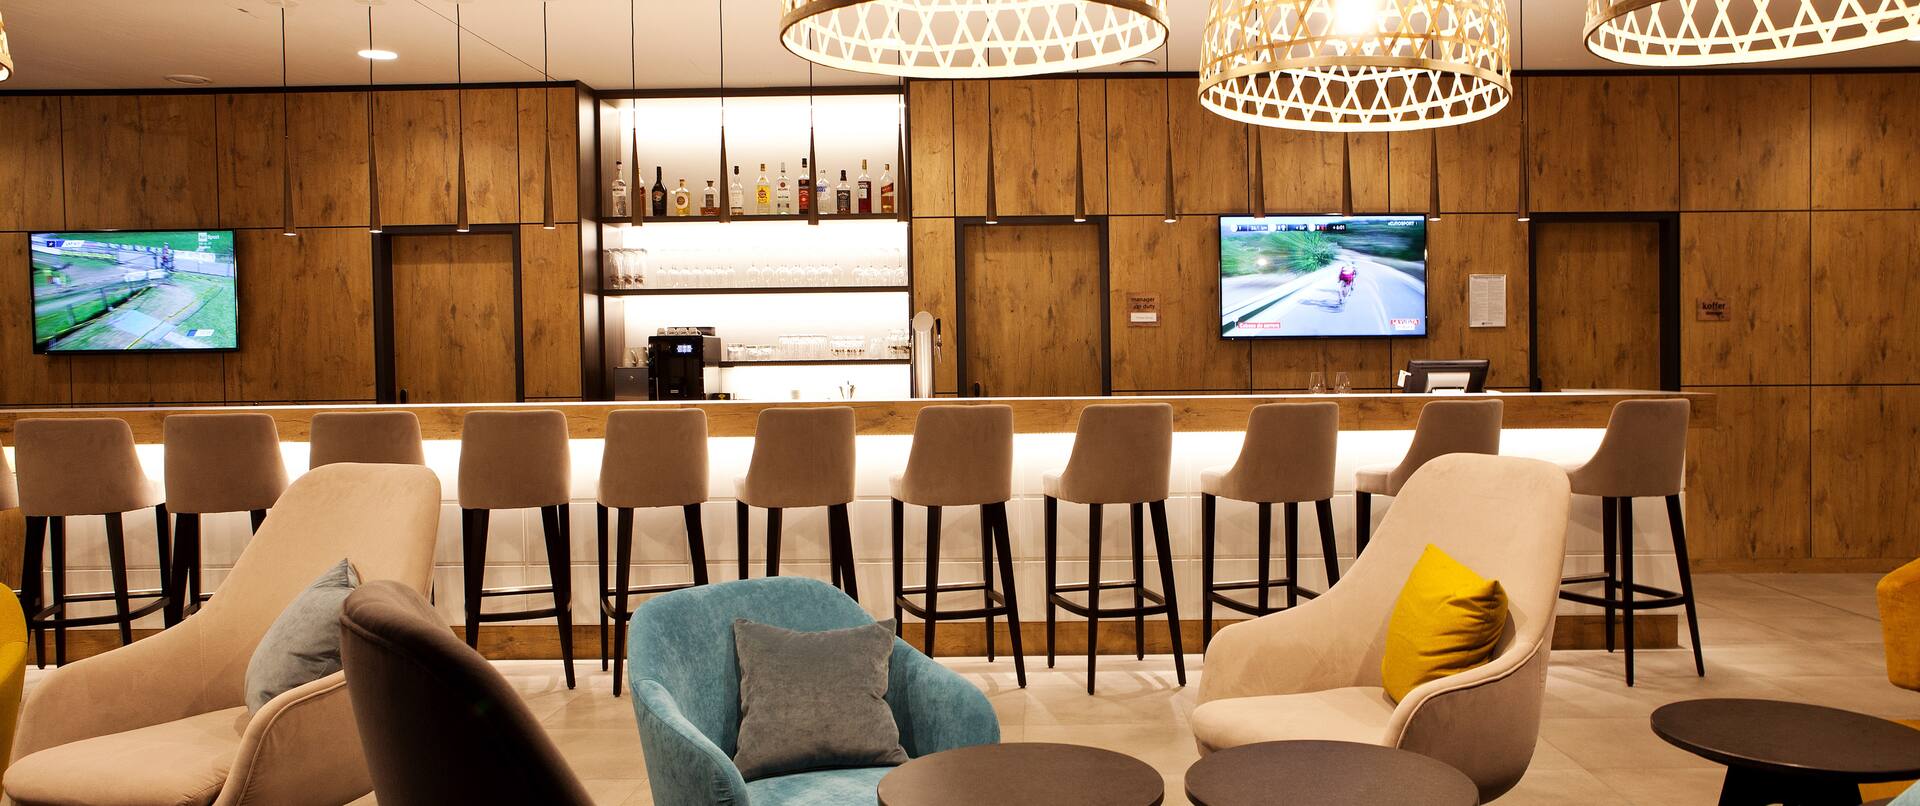 Lobby bar with lounge area seating